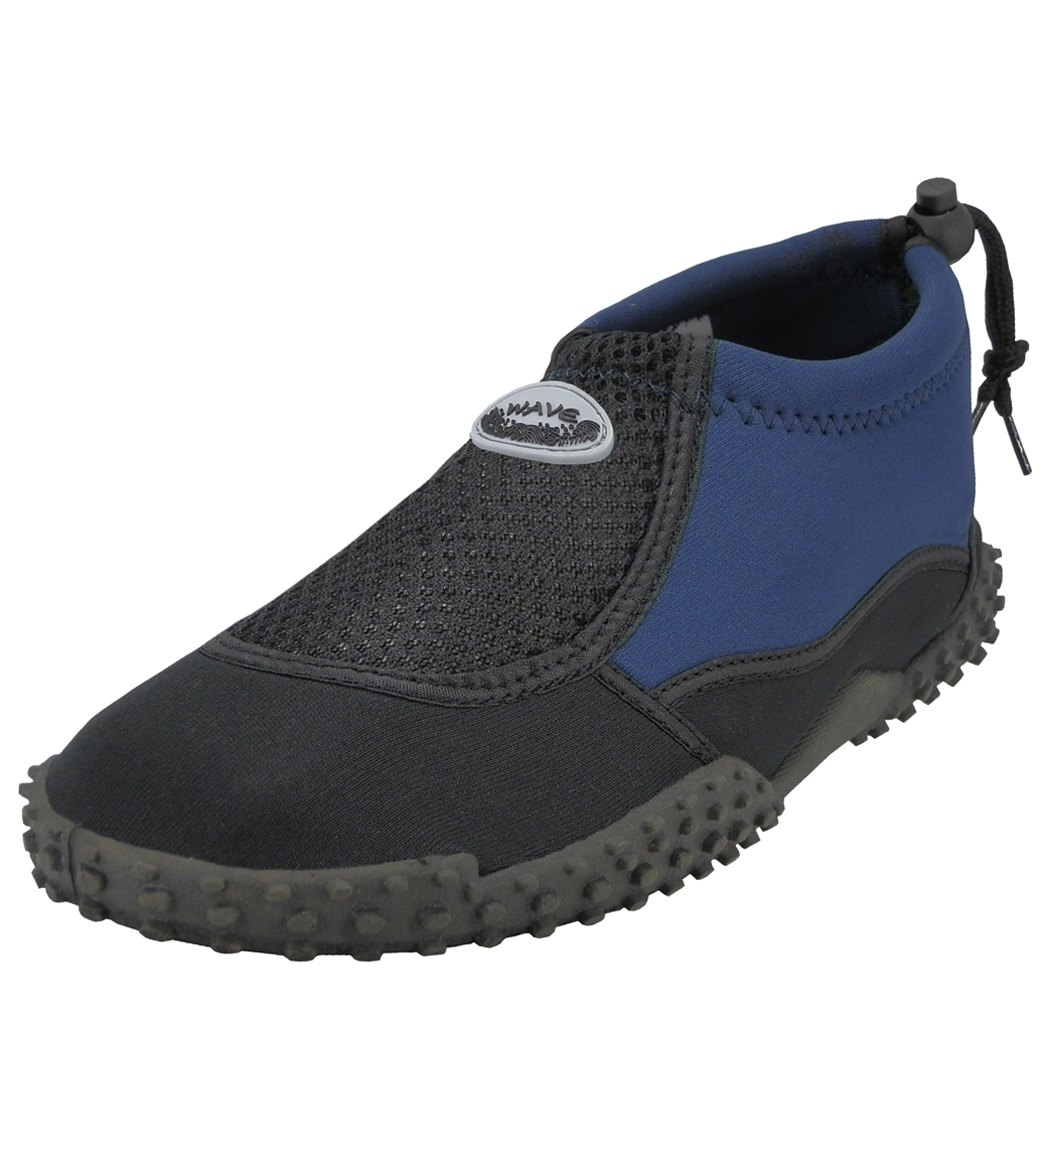 Easy USA Men's Mesh Upper Water Shoes at SwimOutlet.com